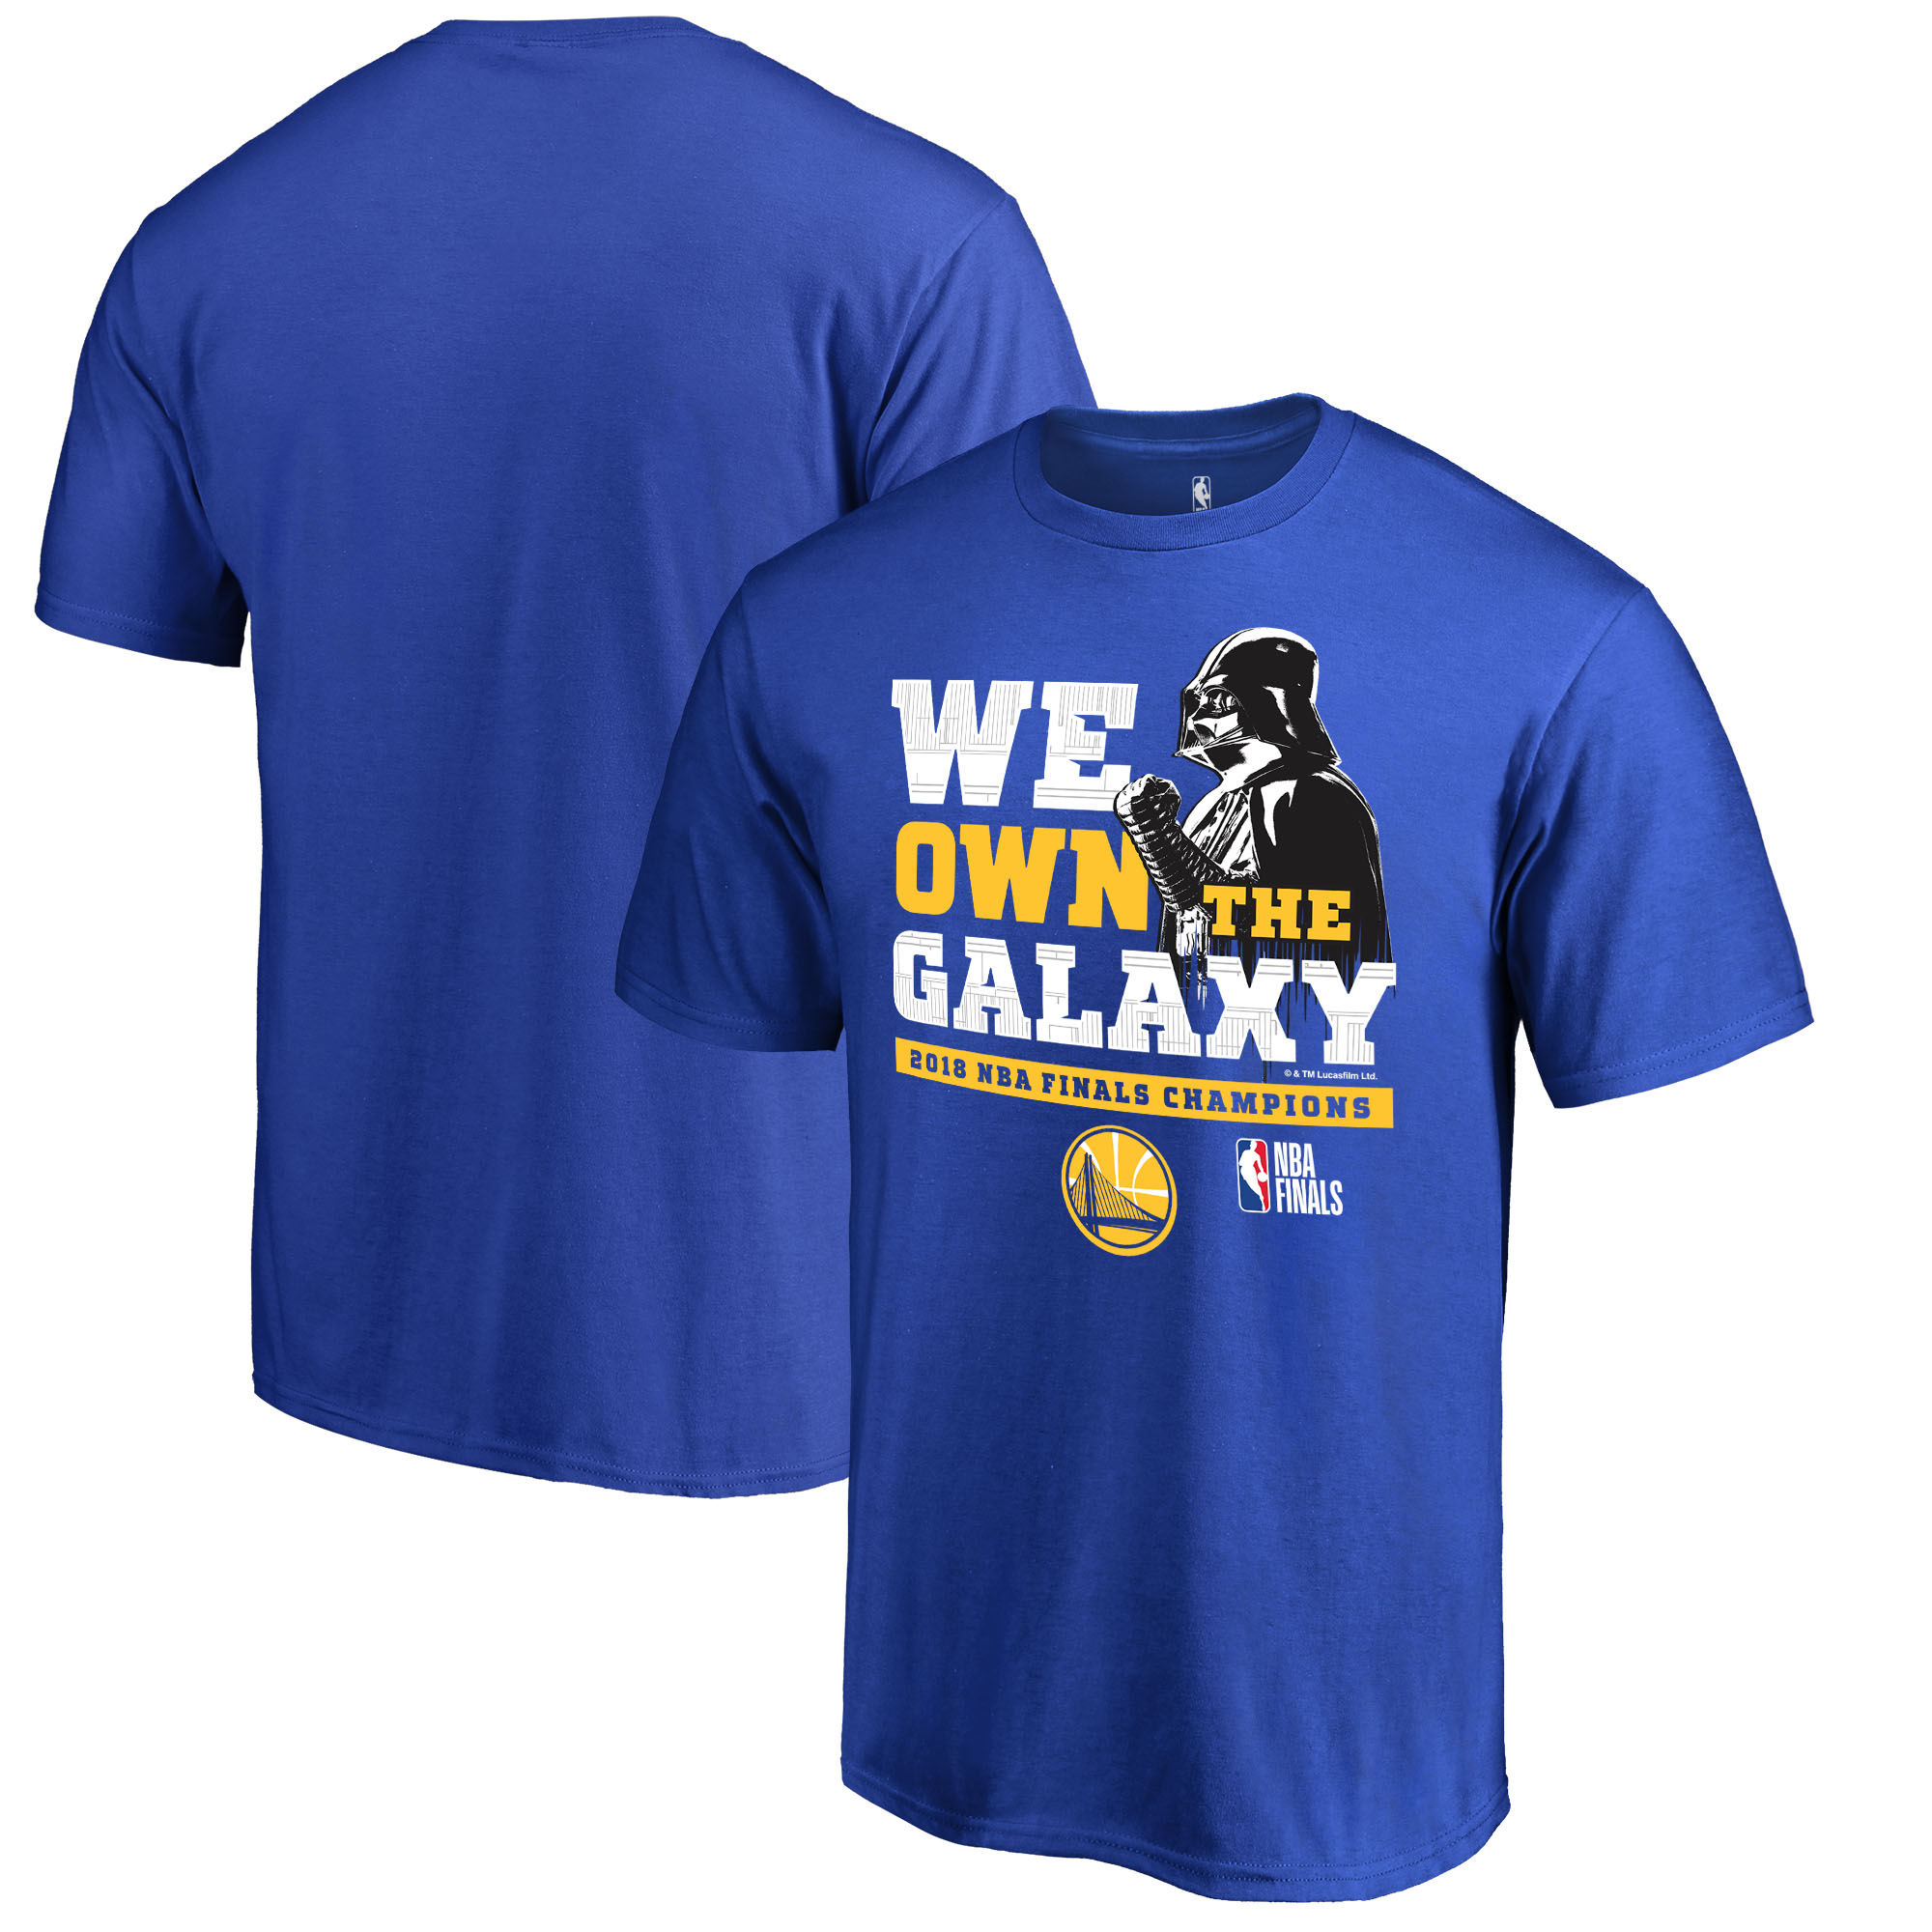 Golden State Warriors Fanatics Branded 2018 NBA Finals Champions Star Wars Own the Galaxy T-Shirt Royal - Click Image to Close